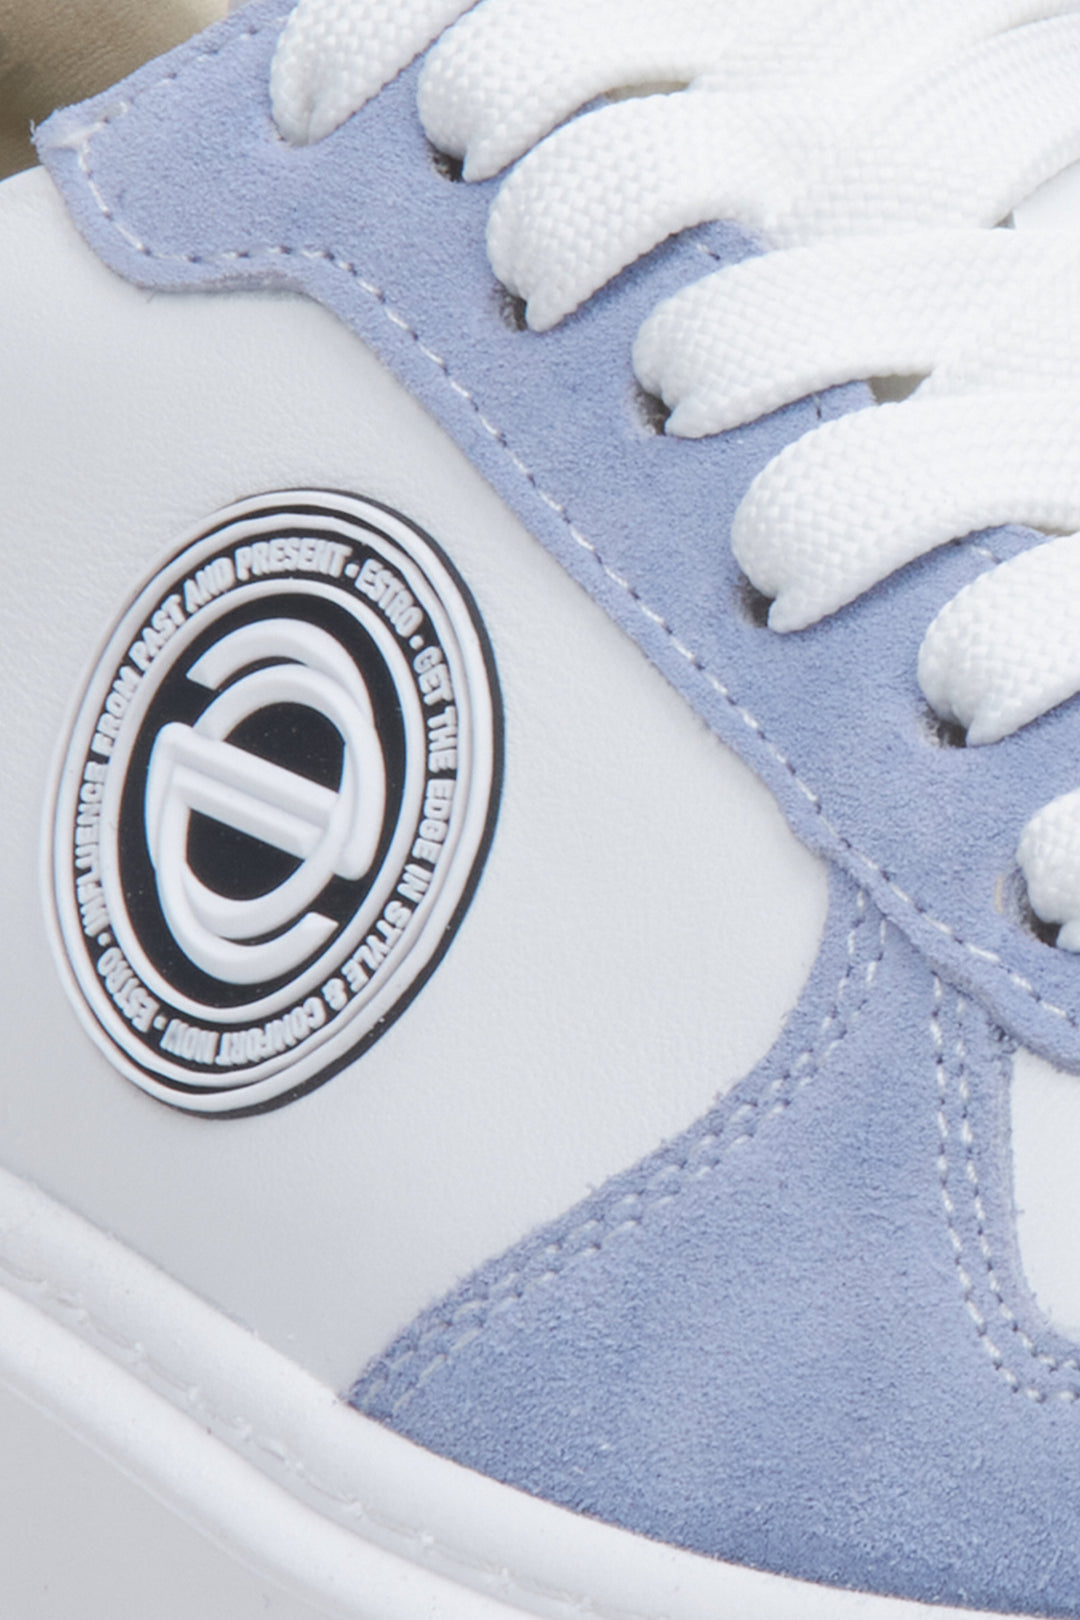 Blue and white sneakers for women, featuring leather and natural velvet - close-up on details.